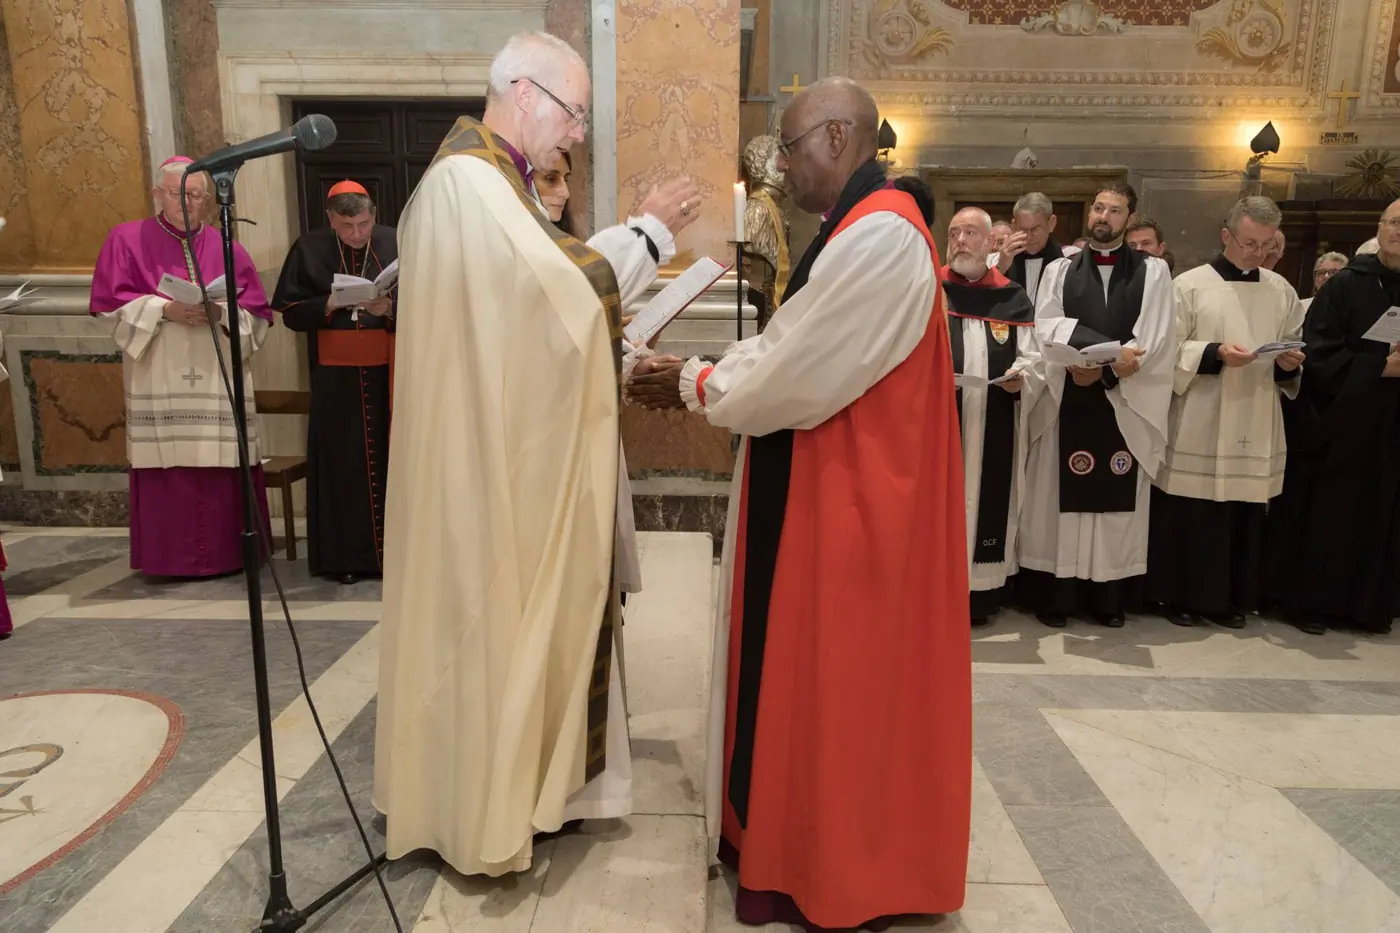 Archbishop Bernard Ntahoturi is installed as Director of the Anglican Centre in Rome